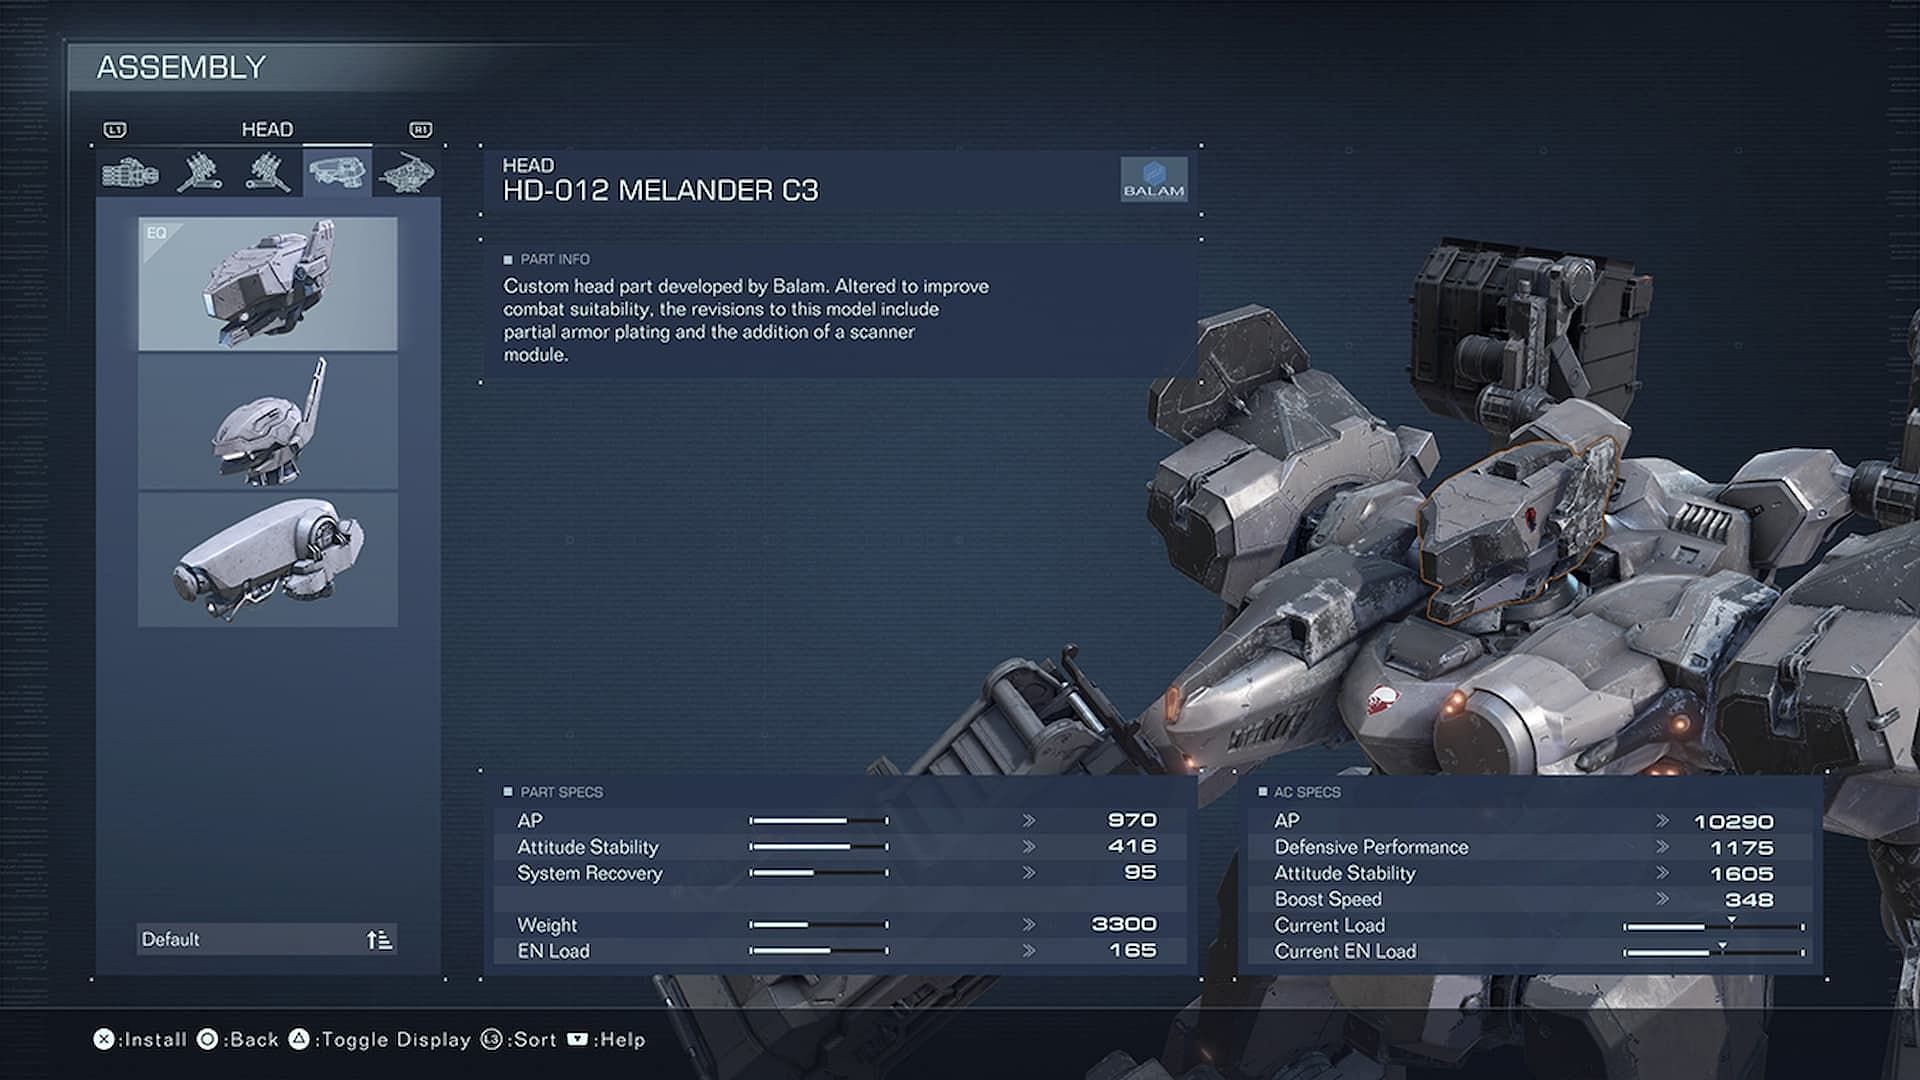 ALULA/21E is the suitable booster choice for this build (Image via FromSoftware)